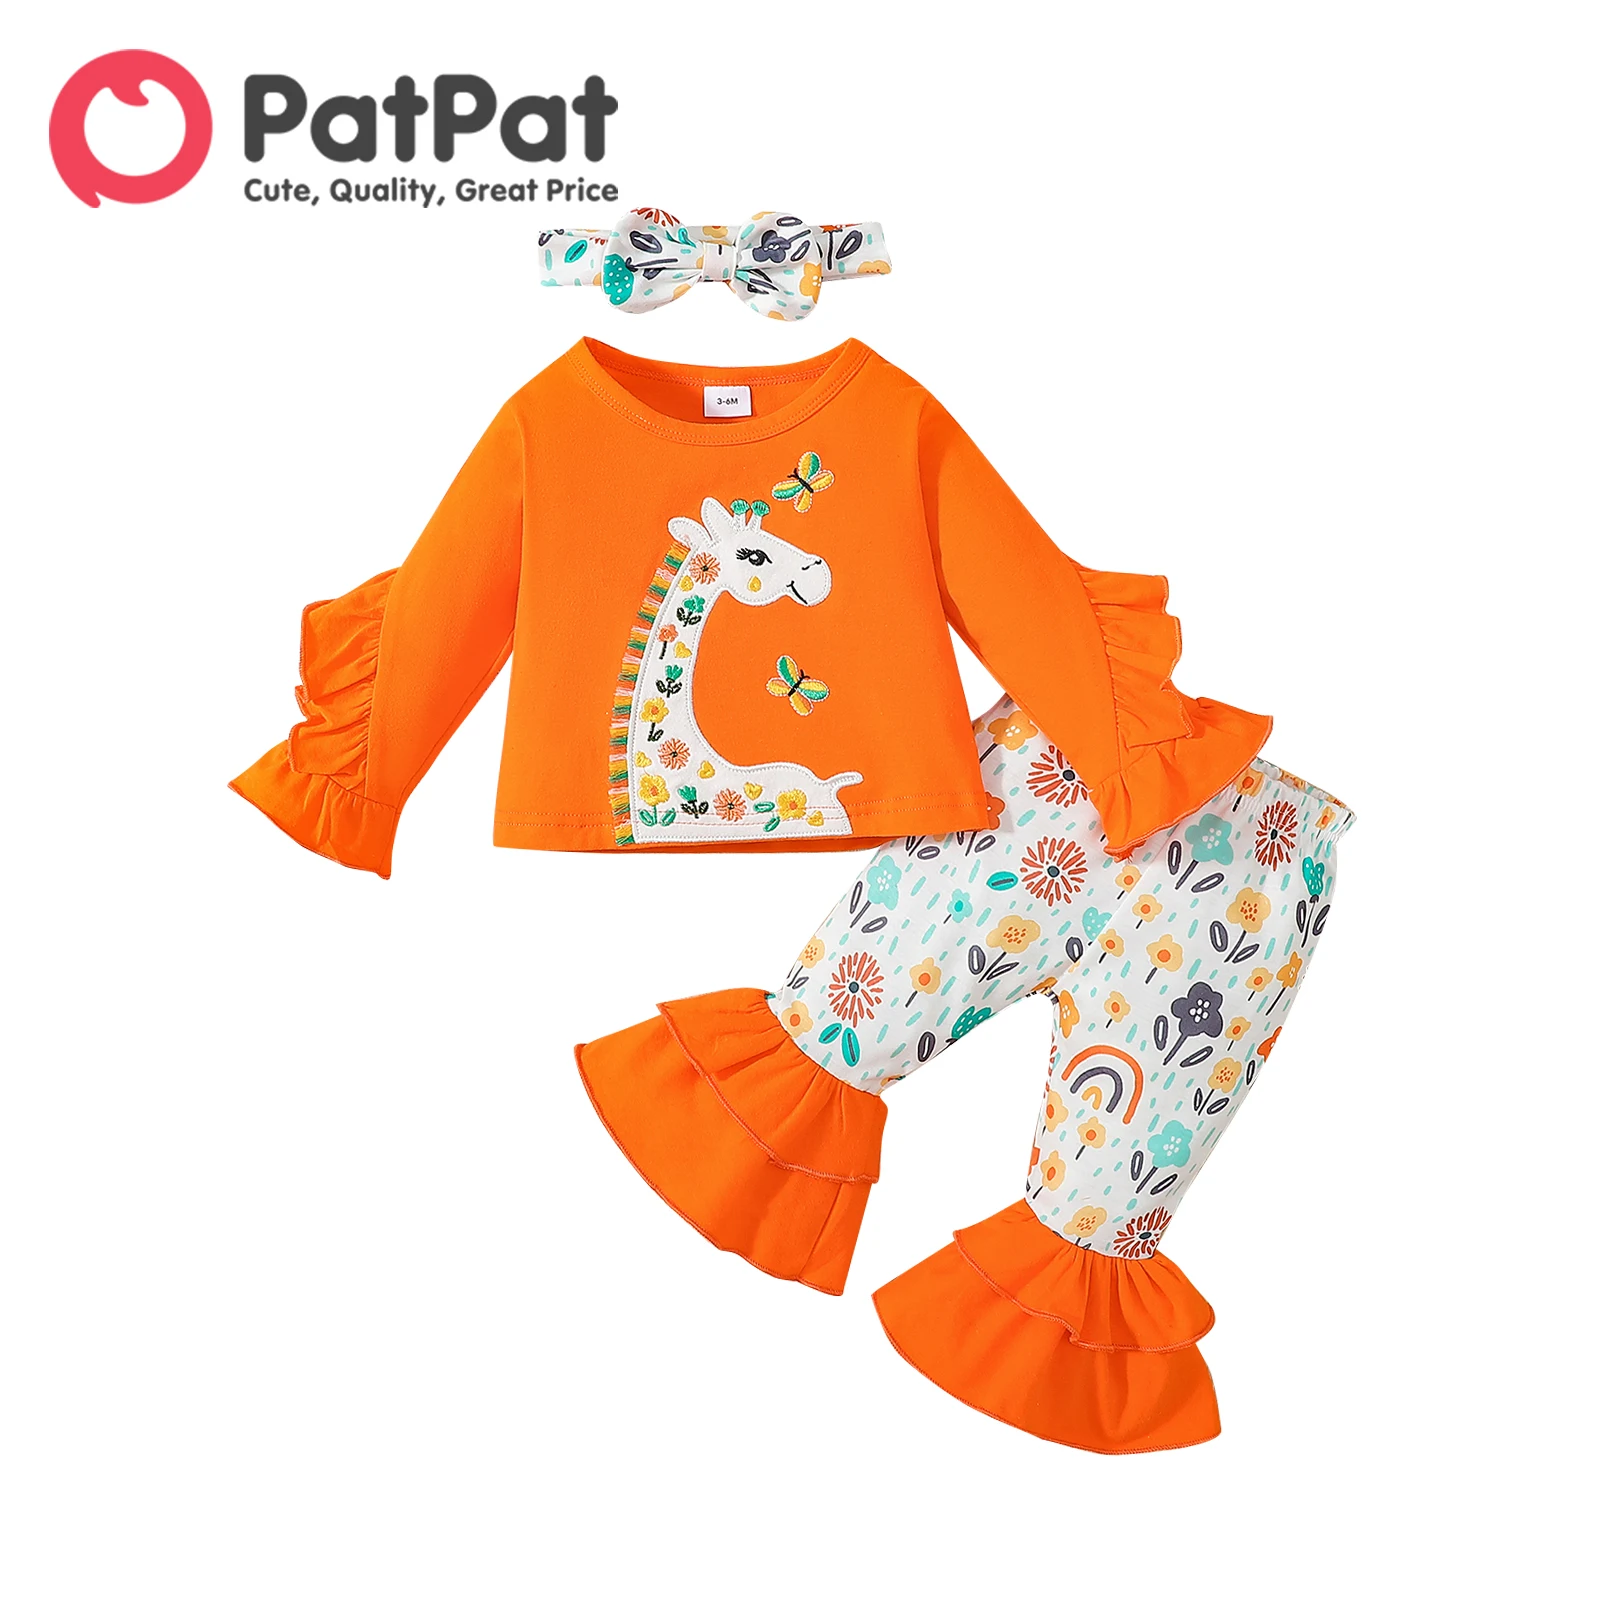 

PatPat 3pcs Baby Girl 95% Cotton Ruffle Trim Long-sleeve Giraffe Graphic Top and Floral Print Flared Pants with Headband Set